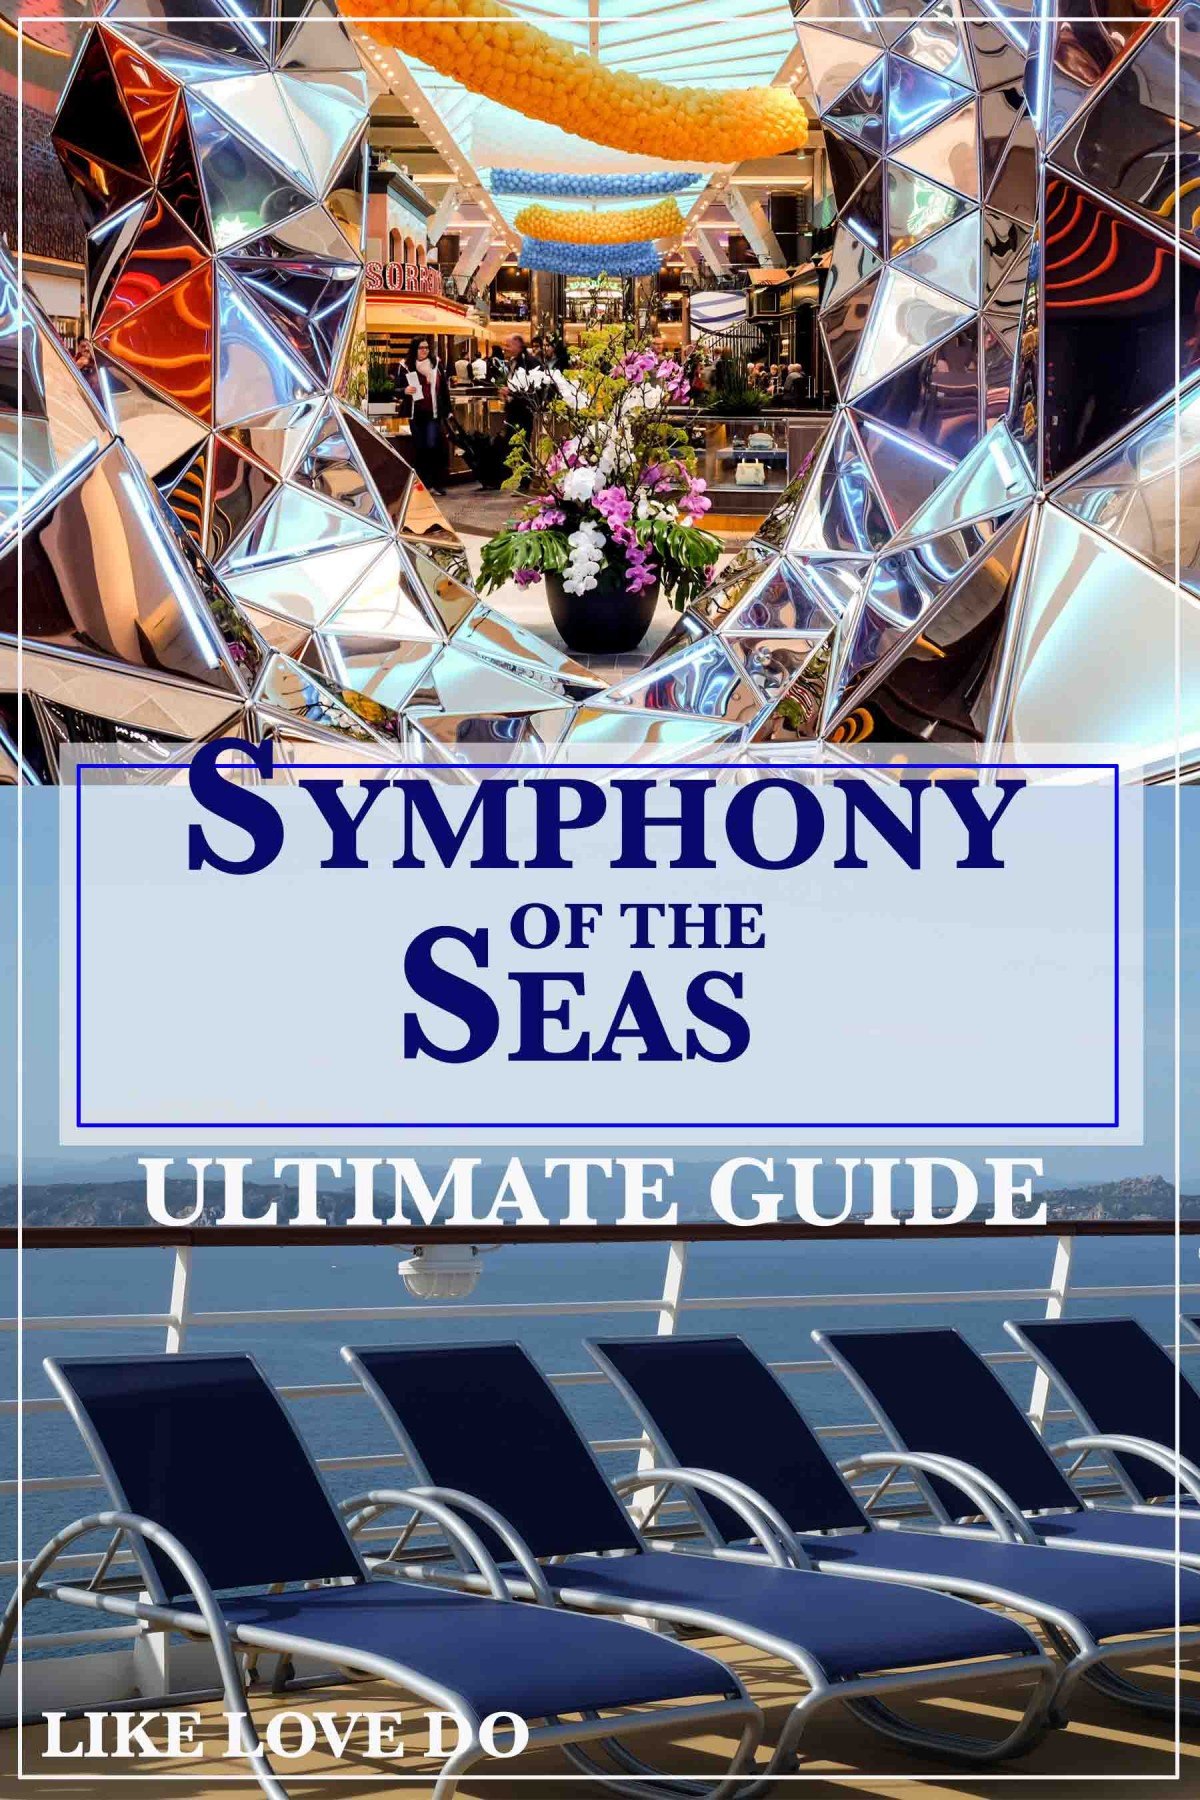 Whats onboard Symphony of the Seas A guide to the Largest ship in the world.